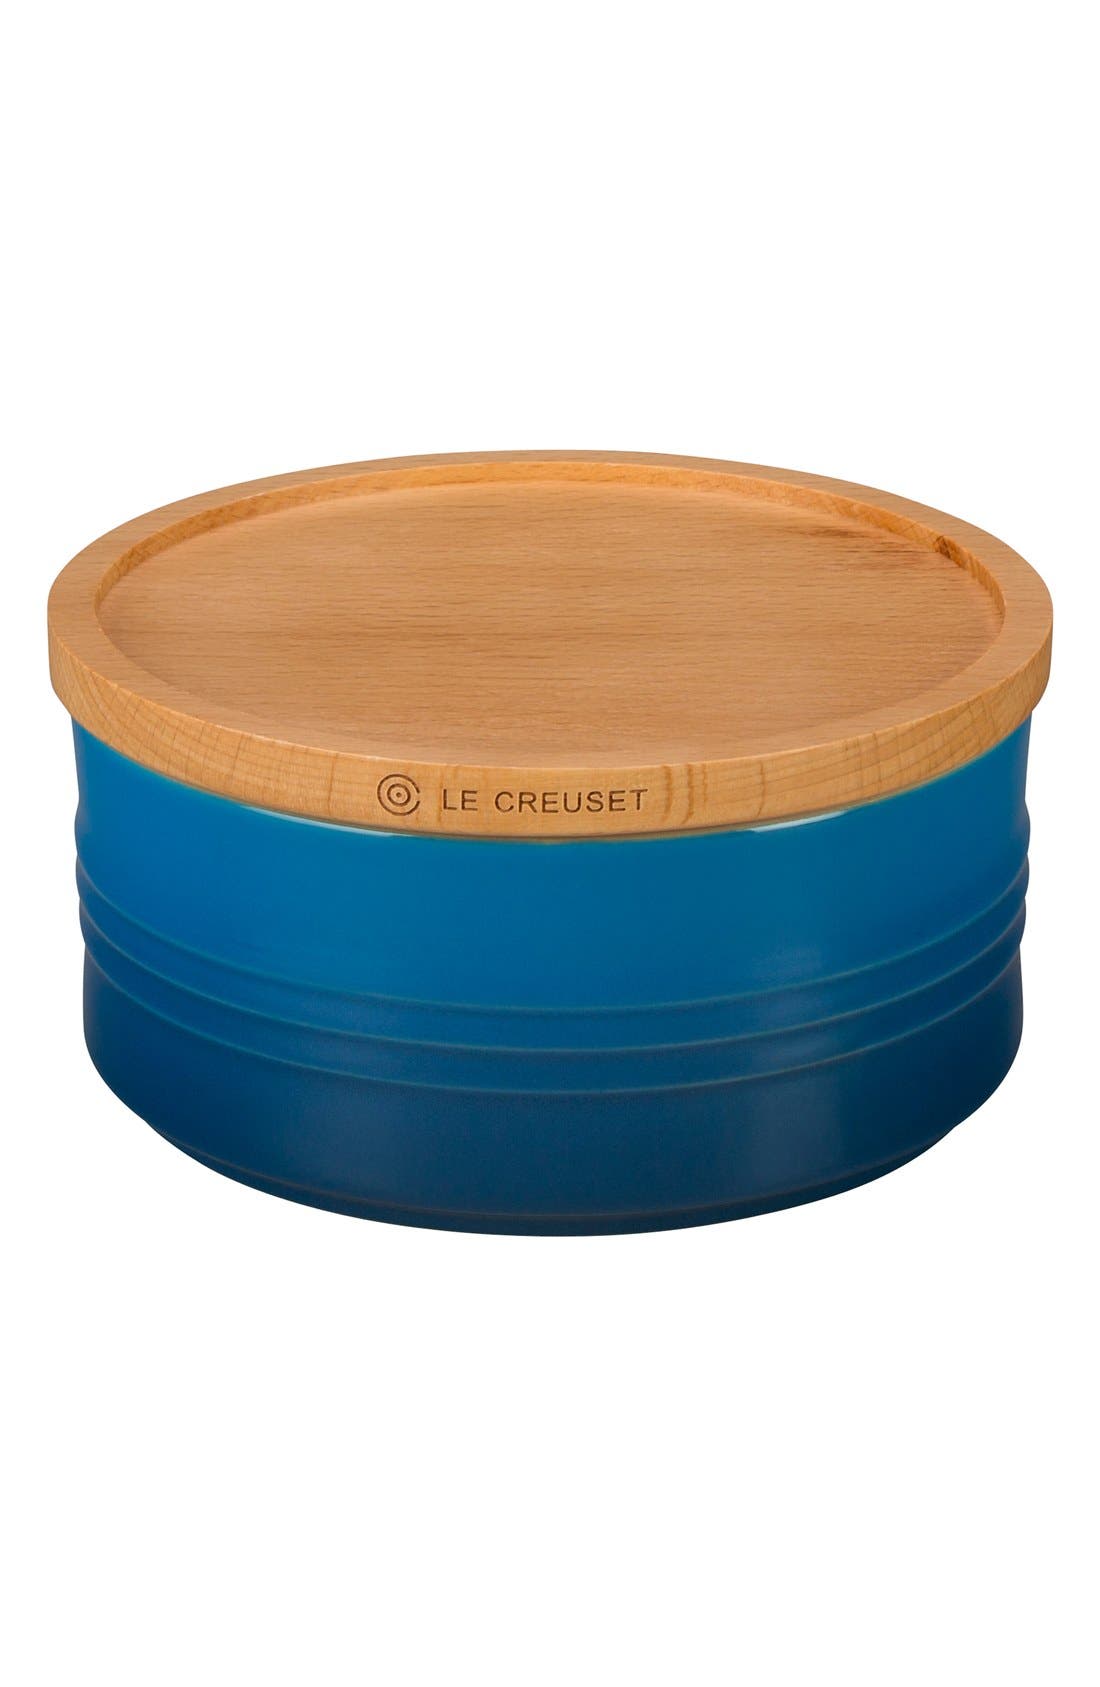 Le Creuset Caribbean Stoneware 3 Piece Canister with Wooden Lid Set 